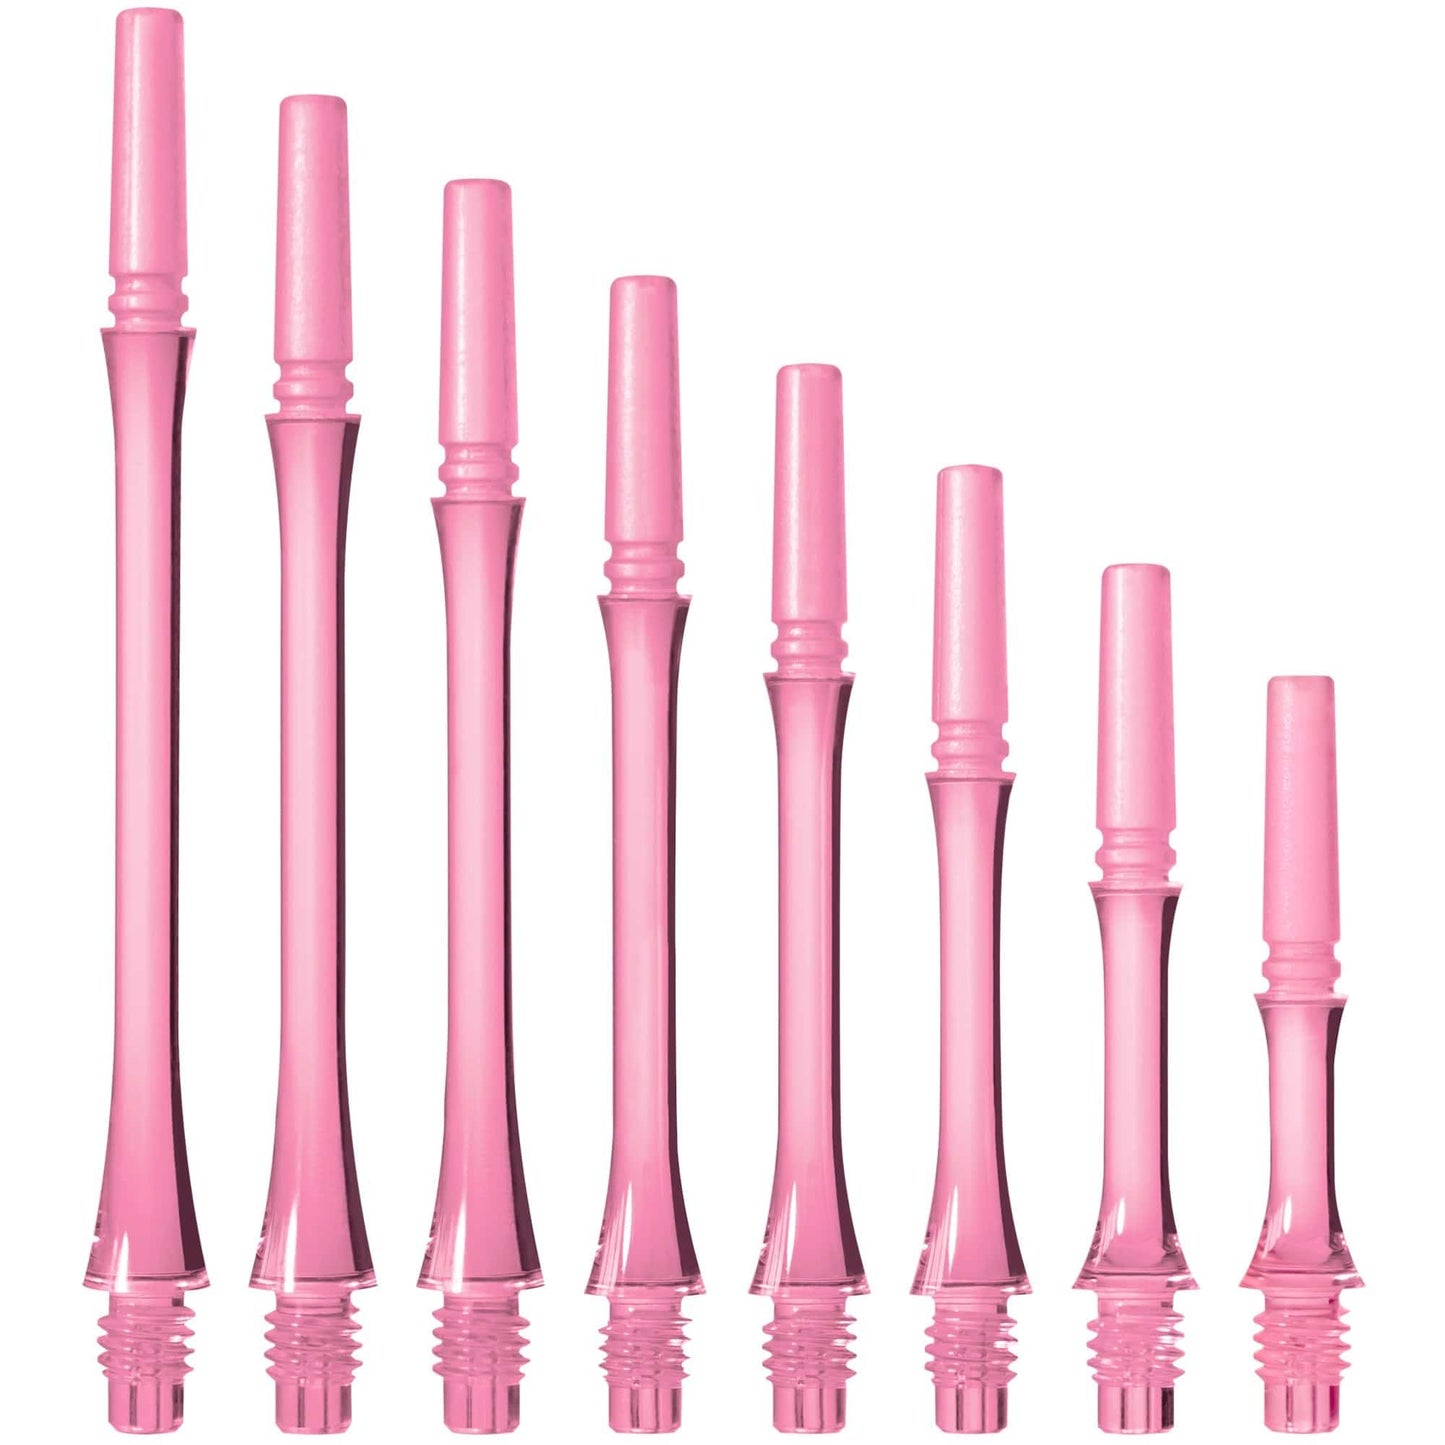 Cosmo Fit Shaft Gear - Locked - Slim - Clear Pink Cosmo Size 1 - 13mm